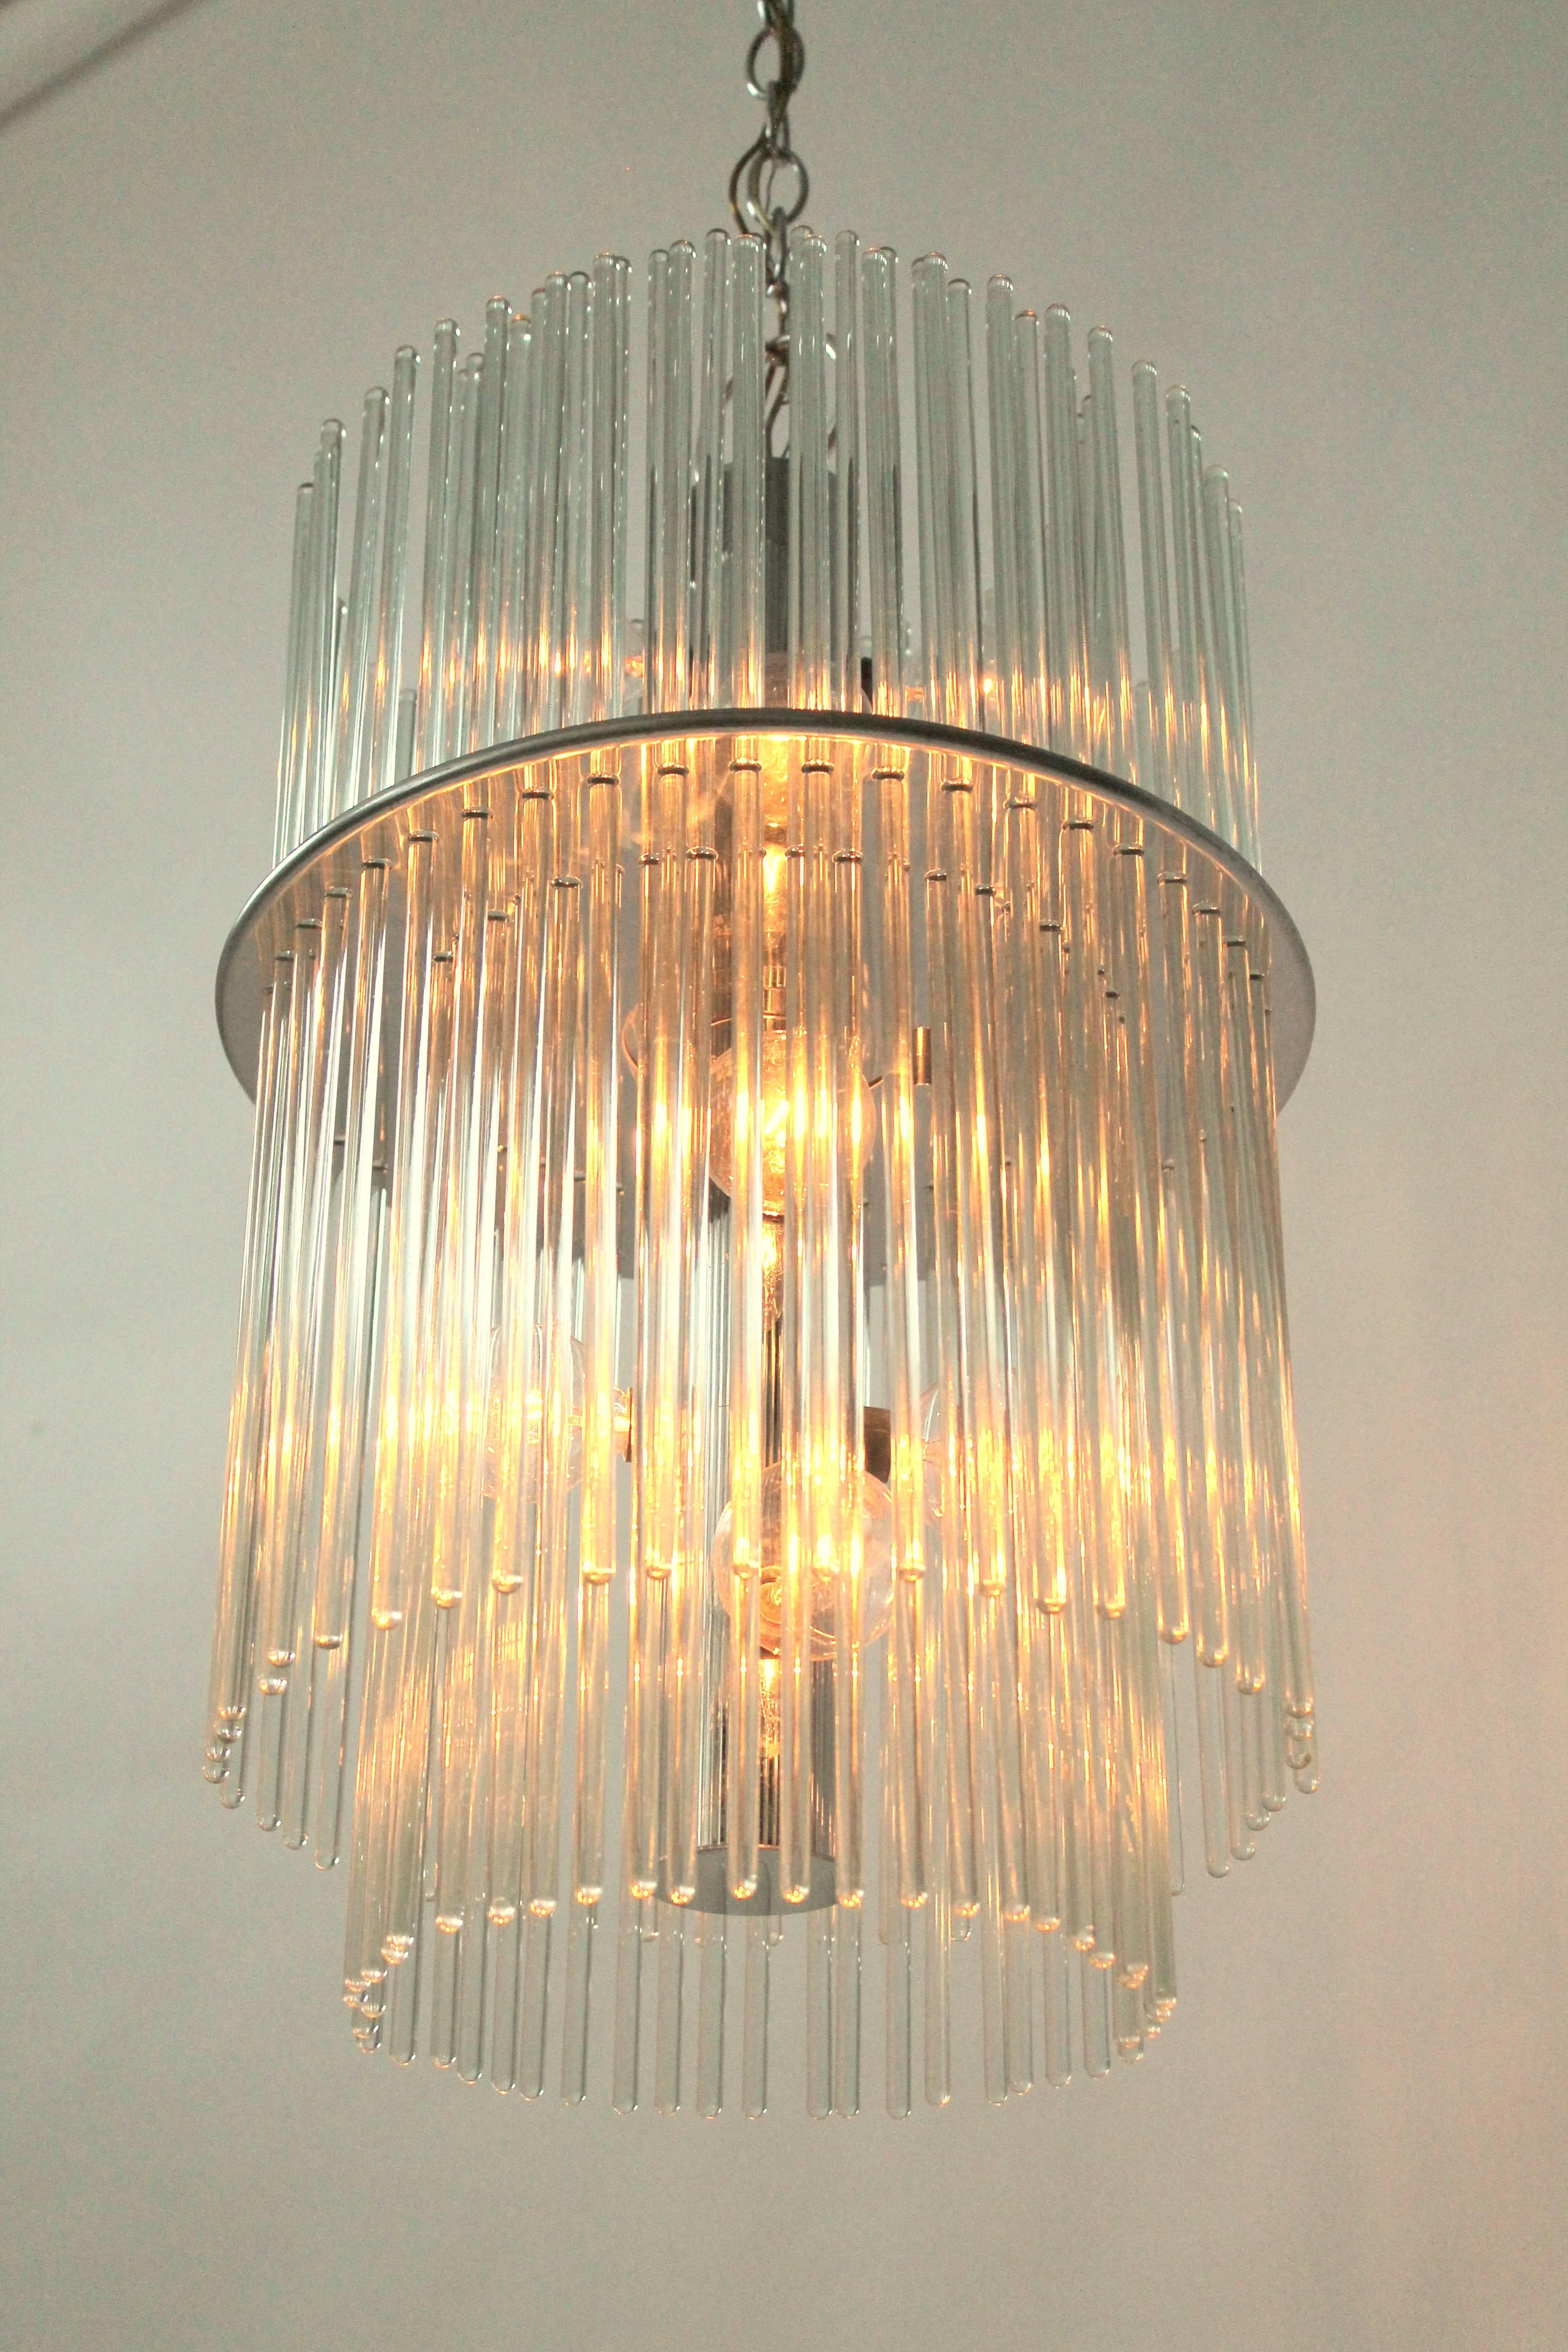 Classic 80s Lightolier chandelier from their Radiance line .

Two row of light catching optical quality glass rods sitting on a nickel plated  pierced steel plate.  

Contain 10 E12 candelabra size light bulbs. 

Well made solid construction.